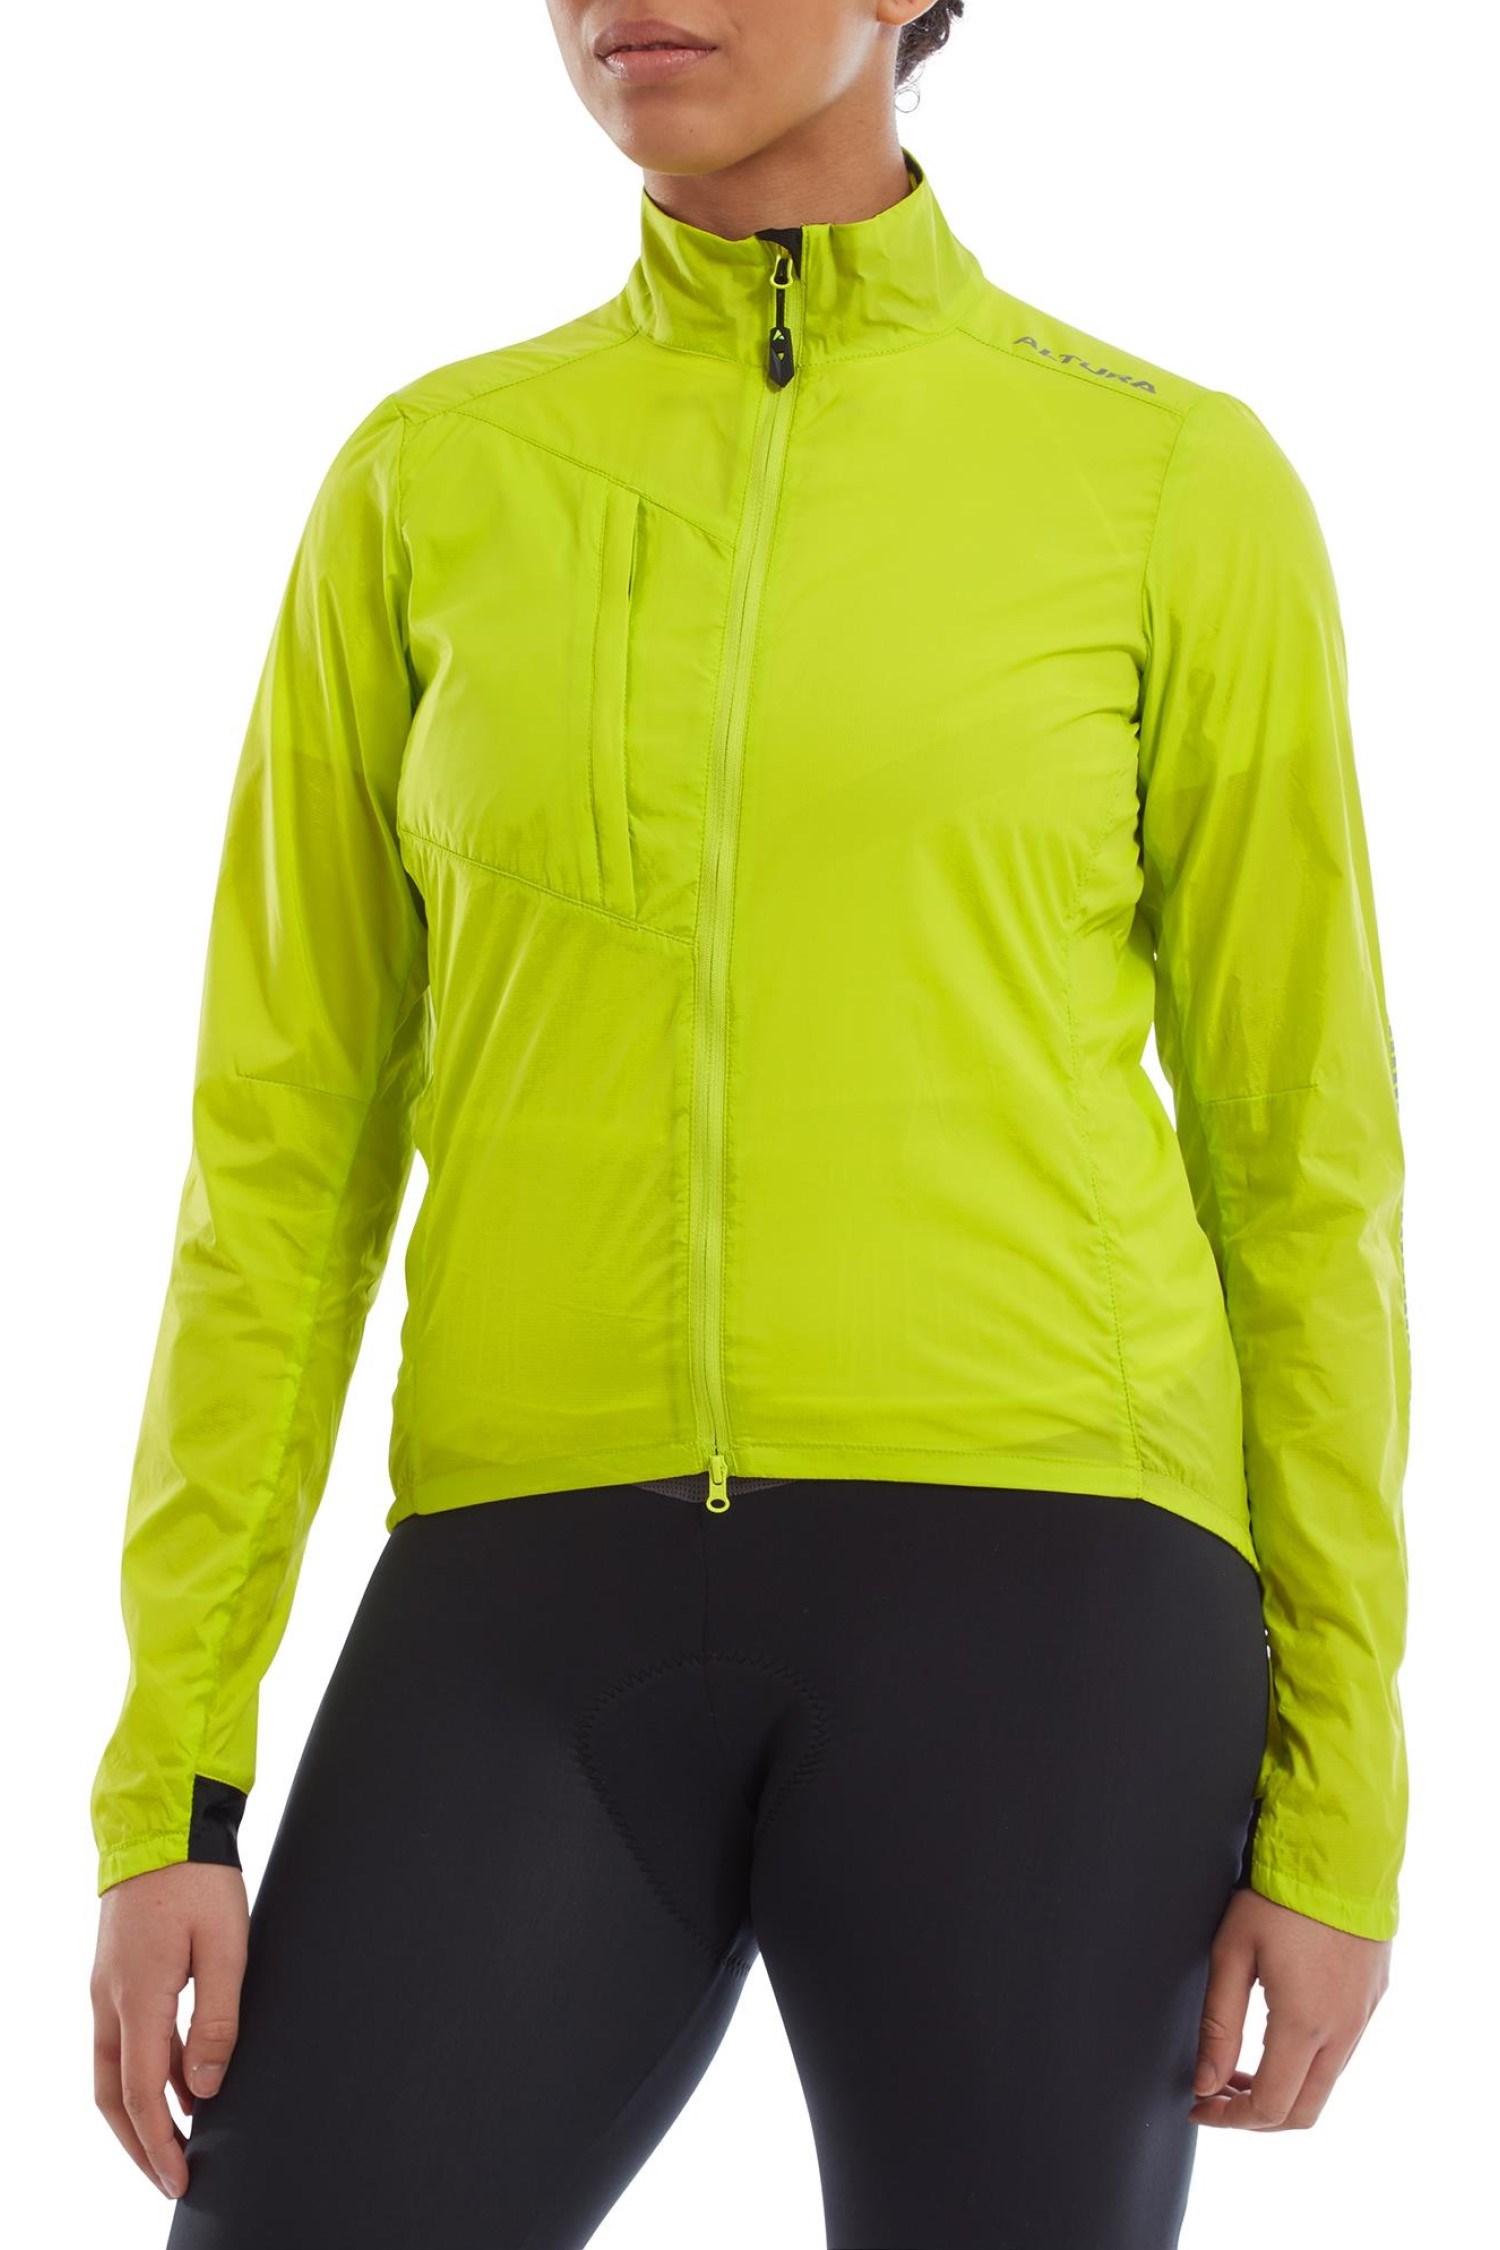 Airstream Womens Windproof Cycling Jacket -